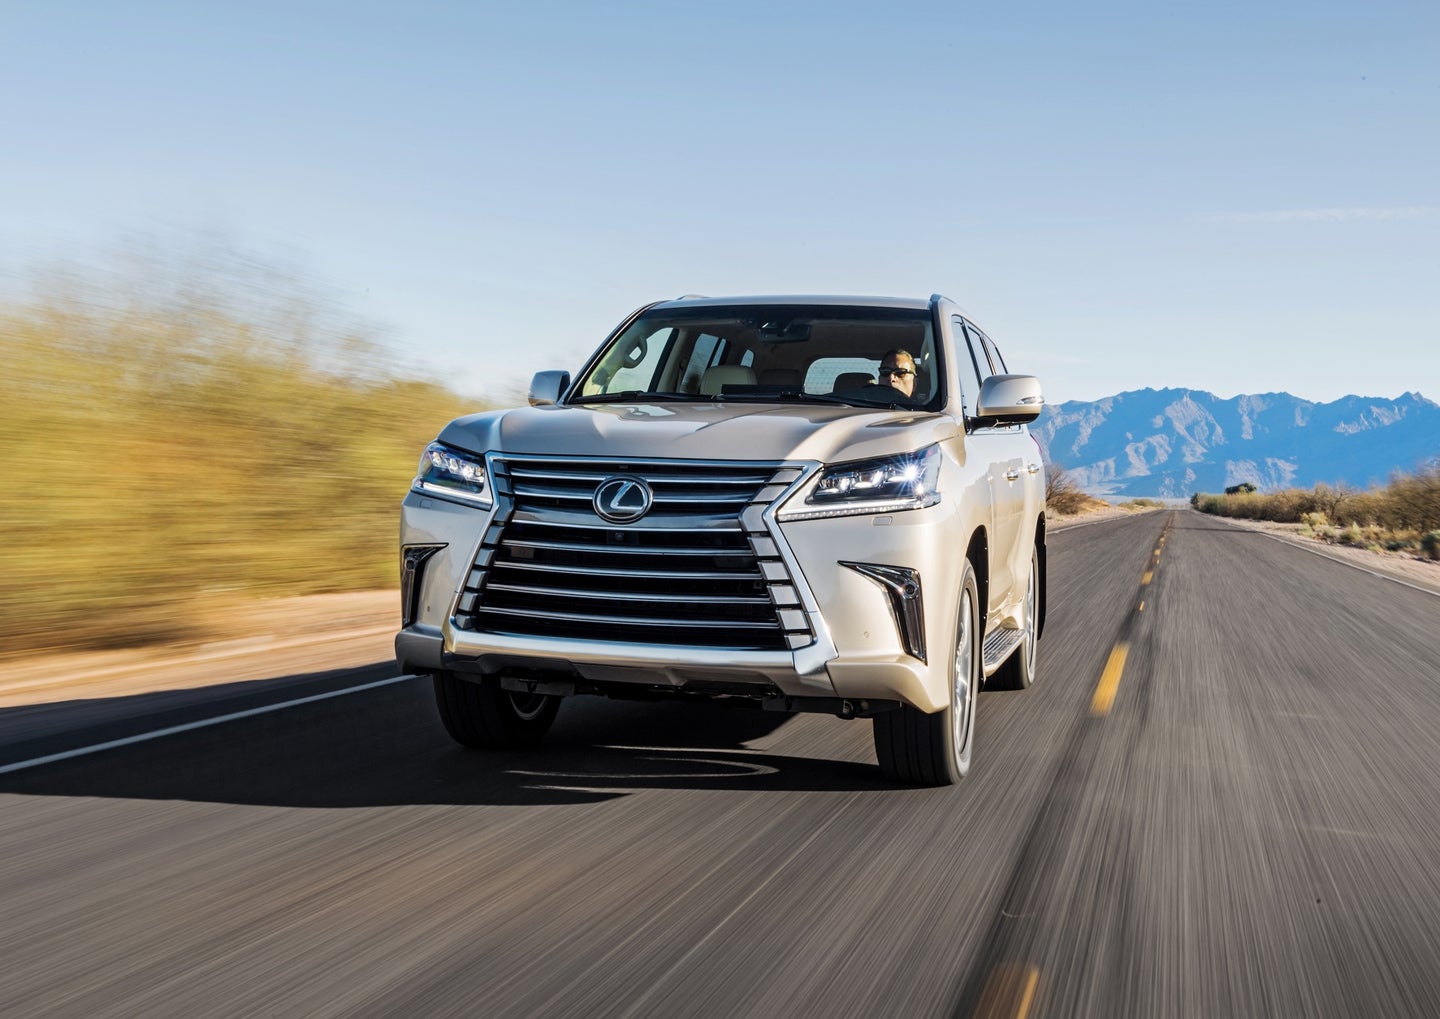 Lexus LX570 SUV Launched in India for a Whopping $344,000